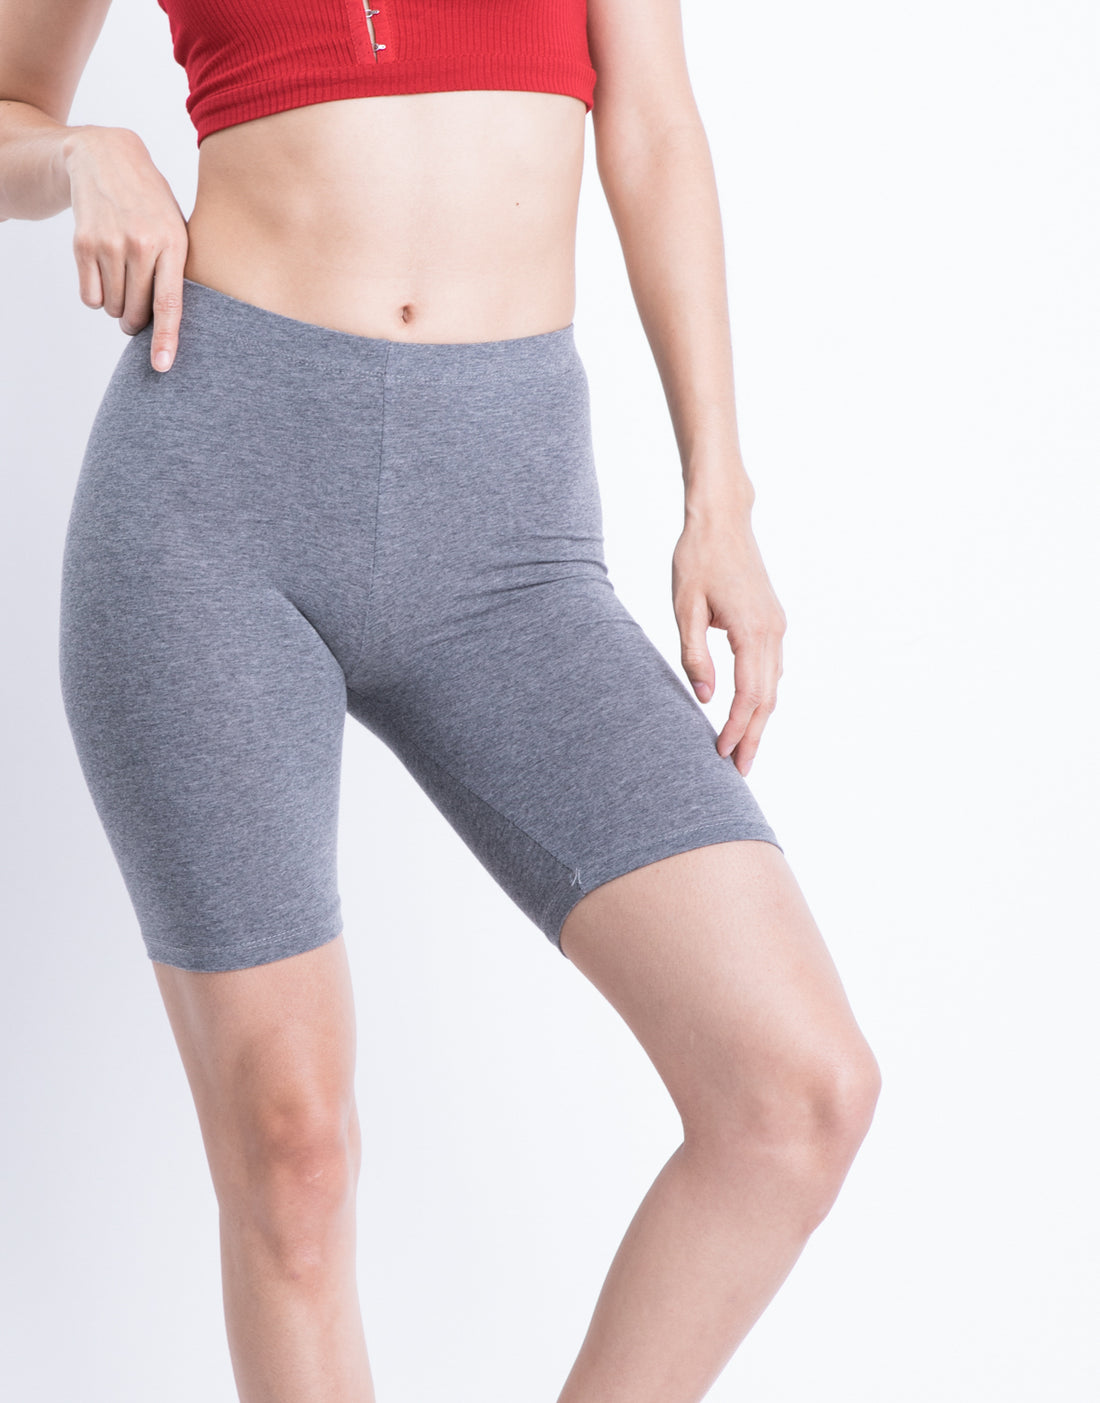 Sporty Bike Shorts Bottoms Charcoal Small -2020AVE